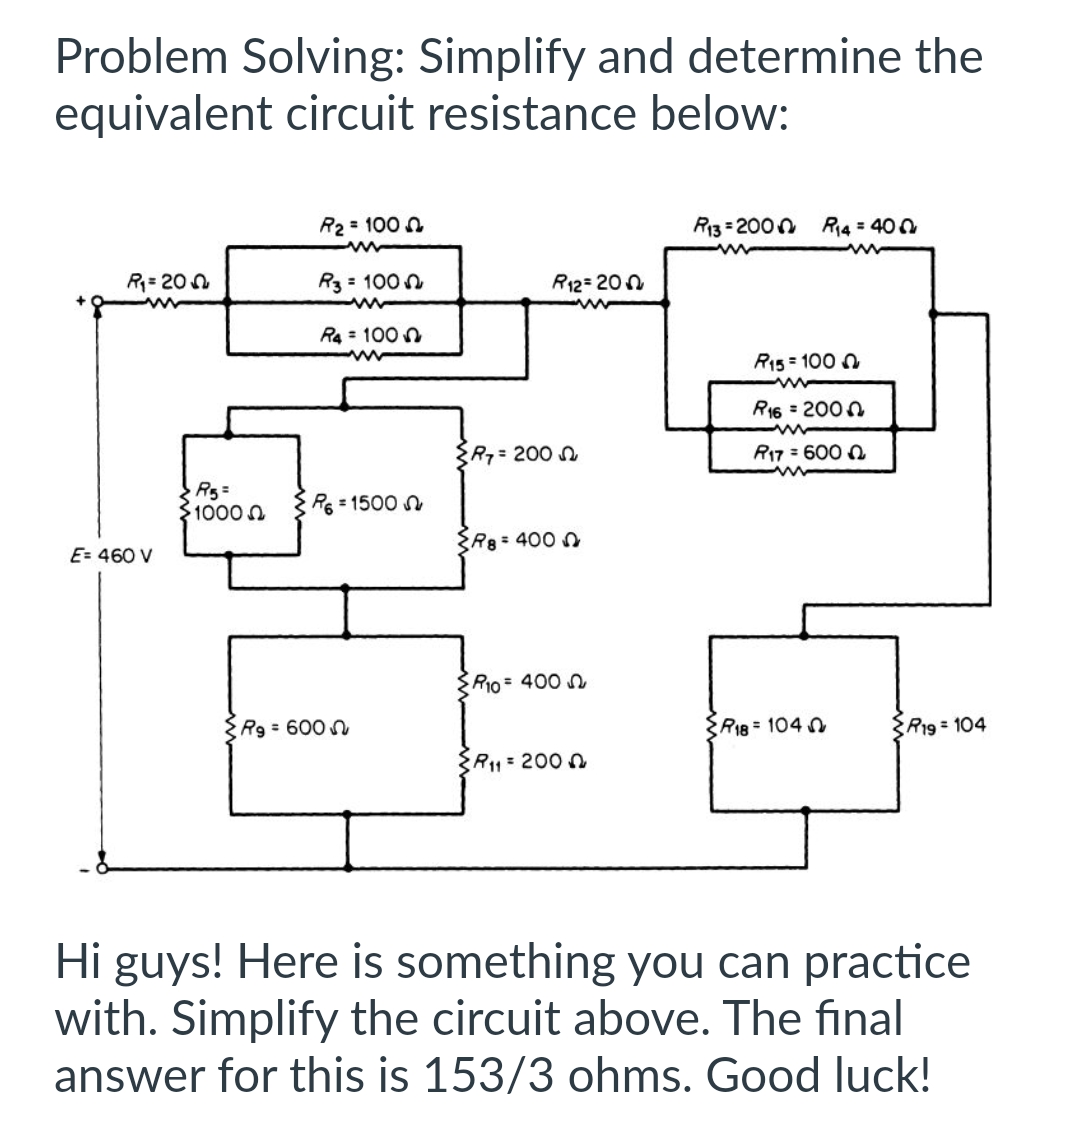 Problem Solving: Simplify and determine the
equivalent circuit resistance below:
R₁=20
E= 460 V
R5=
10000
R₂ = 100
R3 = 100
R4 = 100
www
R6=1500
Rg = 600
R7 = 200
R12=200
R8 = 400
R10 = 400
R₁1= 2000
R13 = 2000 R₁4 = 400
R15 = 1000
www
R16 = 2000
R17 = 6000
R18 1040
R19 = 104
Hi guys! Here is something you can practice
with. Simplify the circuit above. The final
answer for this is 153/3 ohms. Good luck!